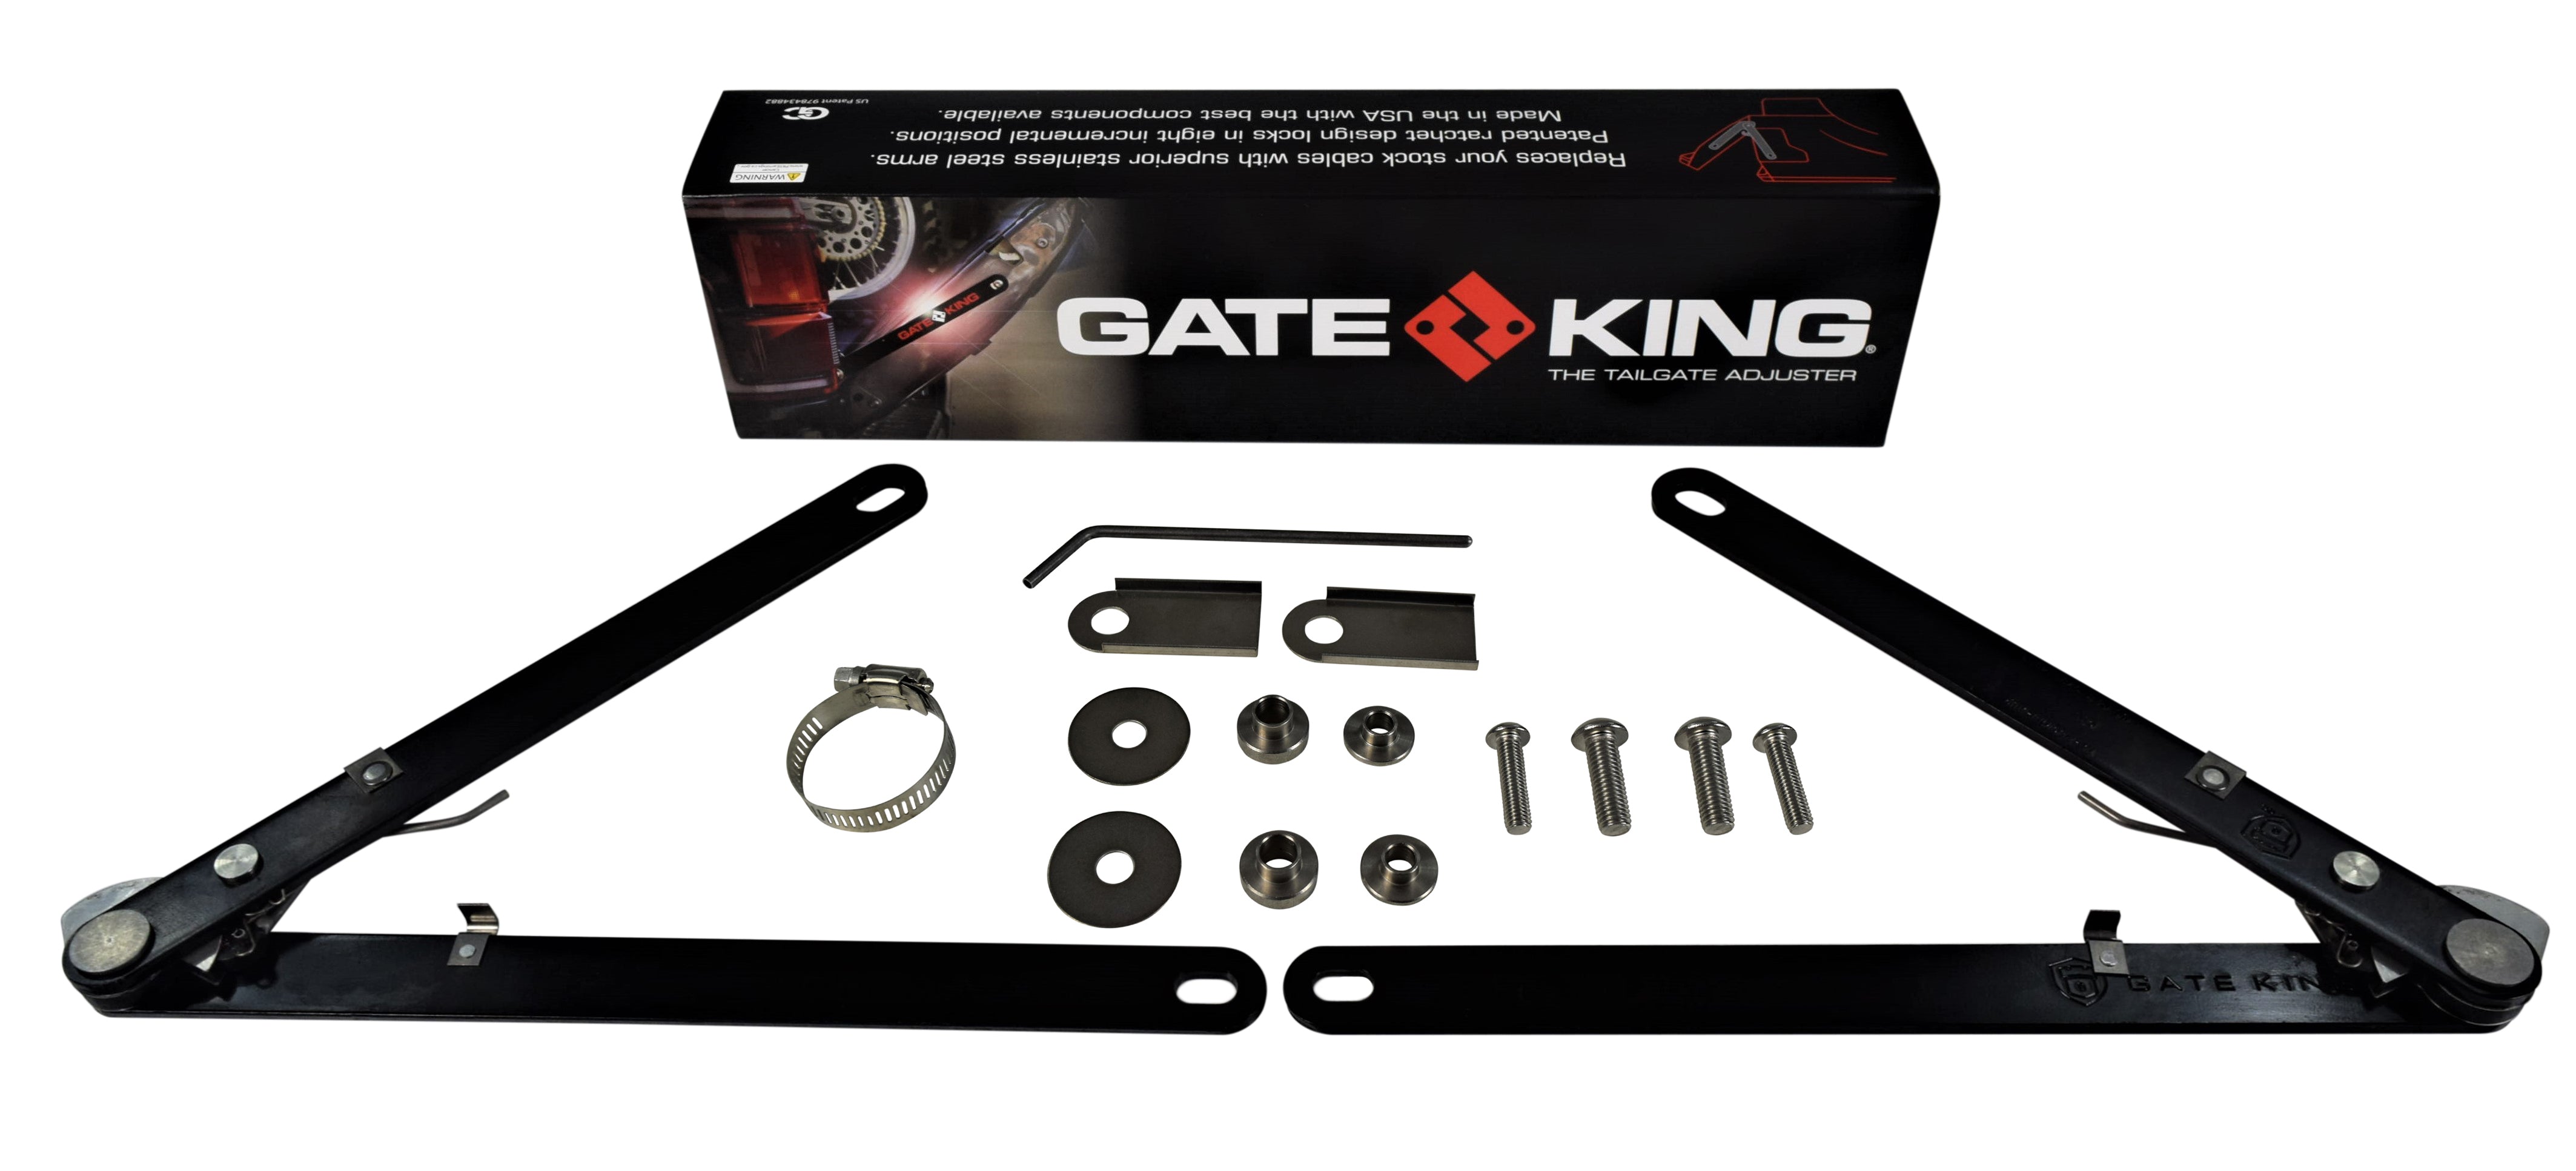 Gate King Ratcheting Multi Position Tailgate Adjuster for Ford F150 2004-2014